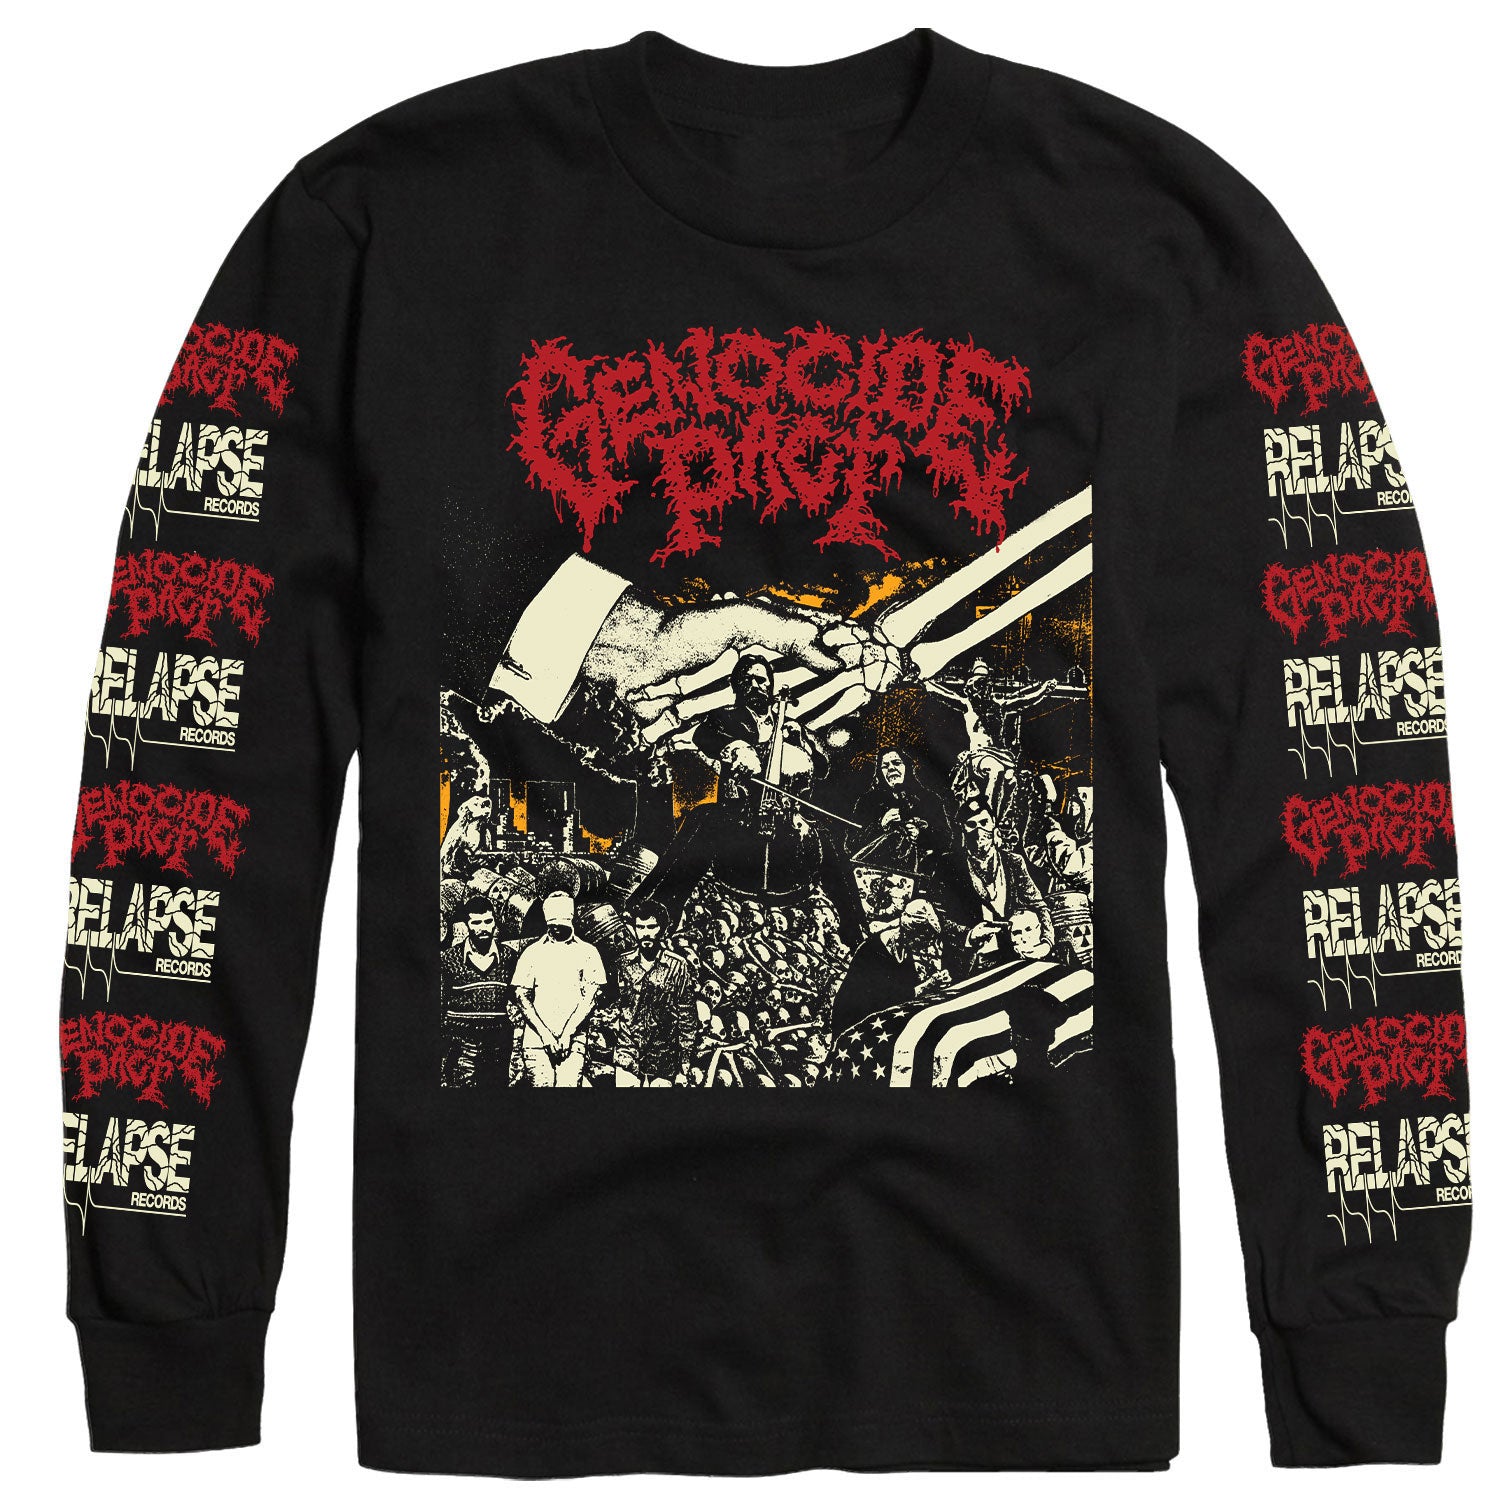 Genocide Pact "Genocide Pact" Longsleeve